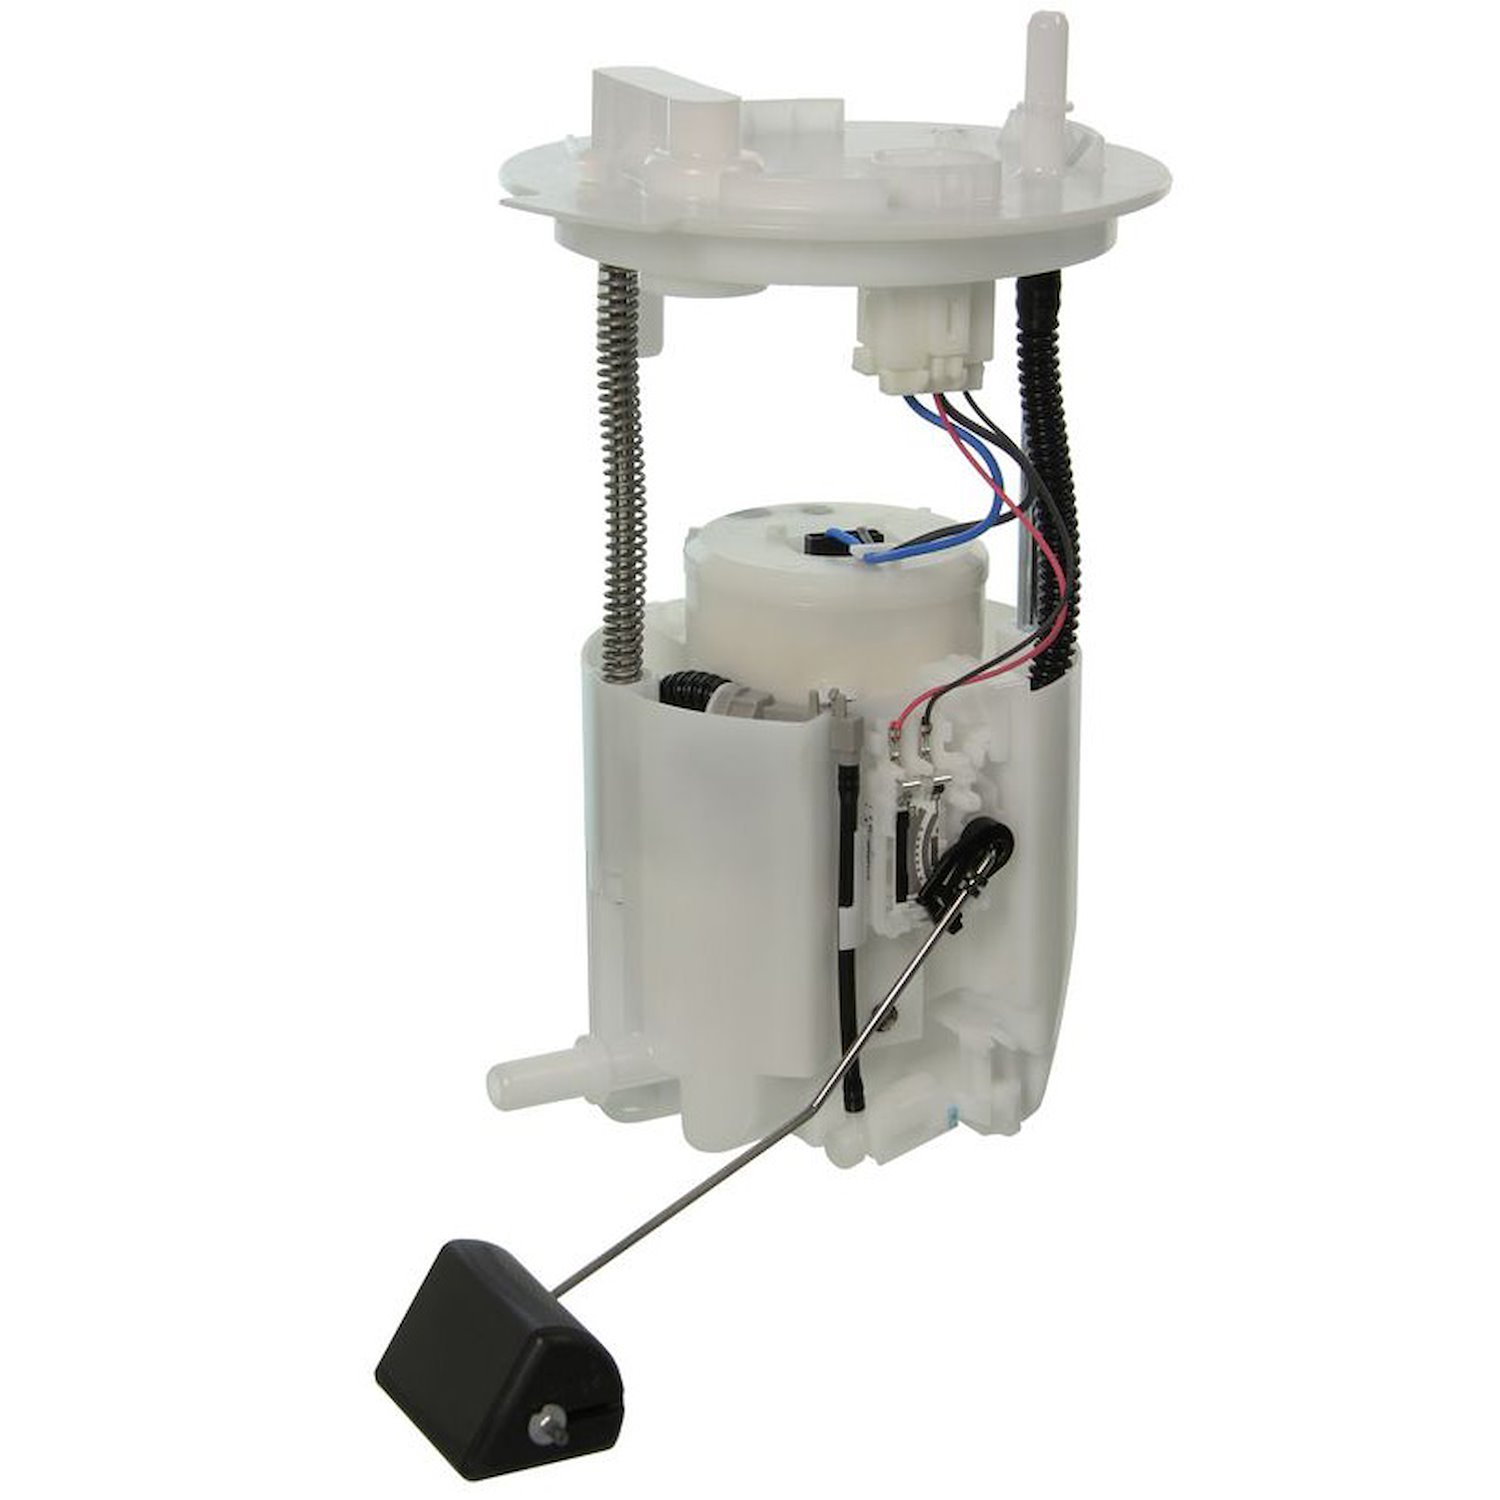 OE Ford Replacement Fuel Pump Module Assembly for 2010-2012 Ford Fusion/Lincoln MKZ